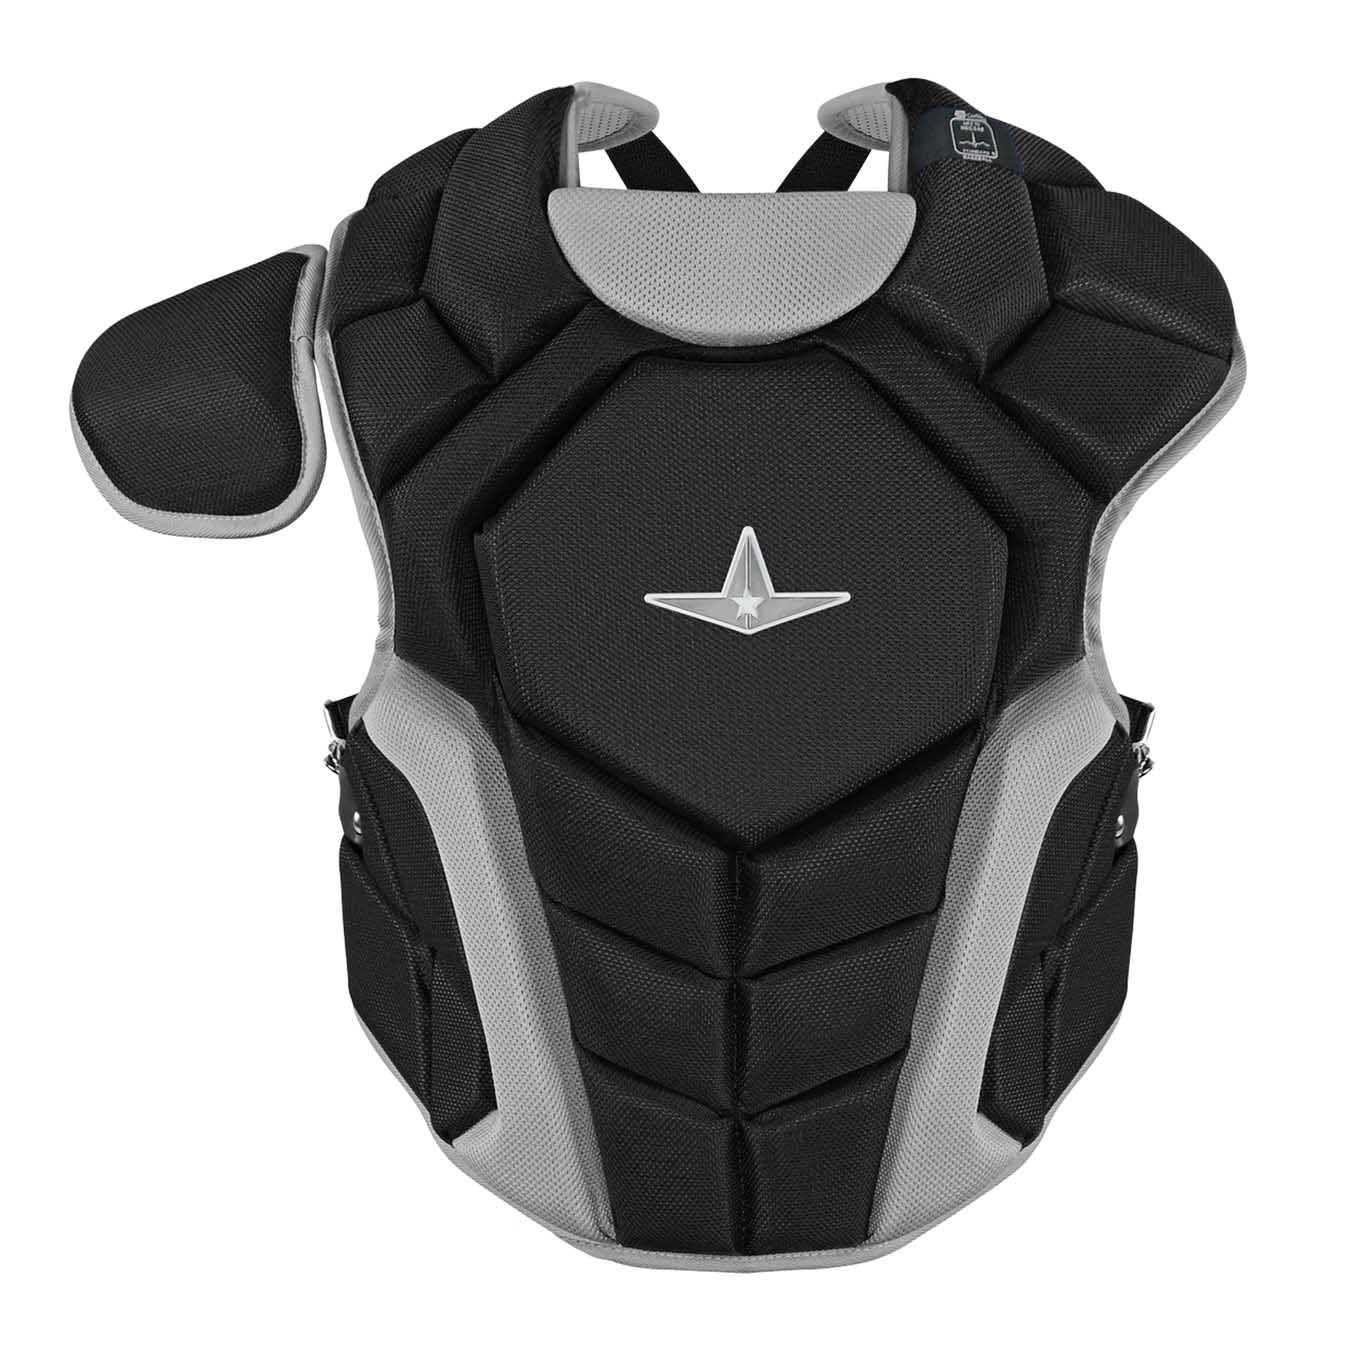 All-Star Top Star Chest Protector Ages 12-16 15.5"